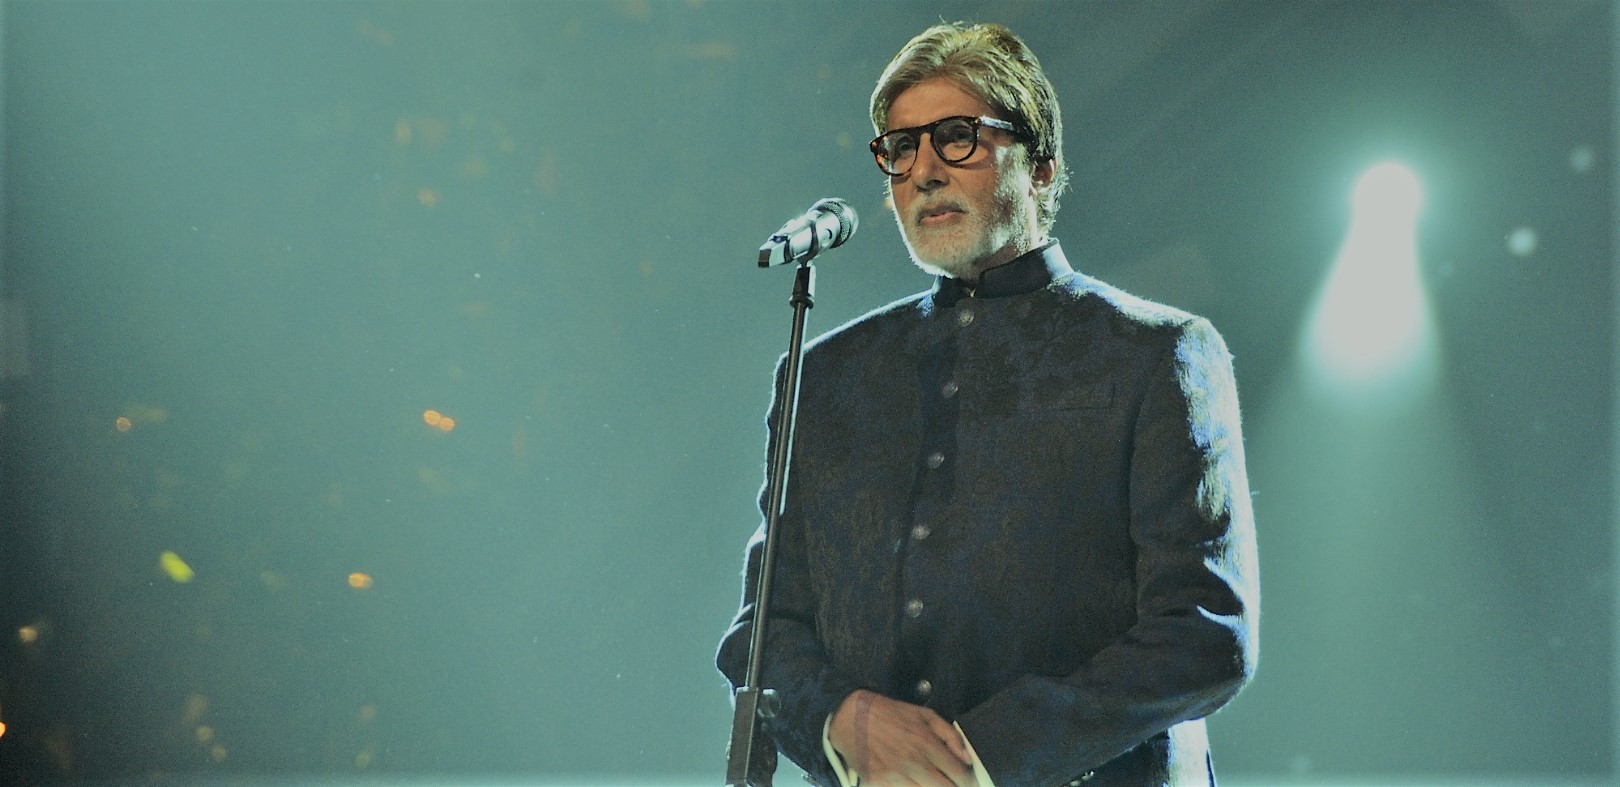 Amitabh Bachchan's tribute to mothers with new song 'Maa'